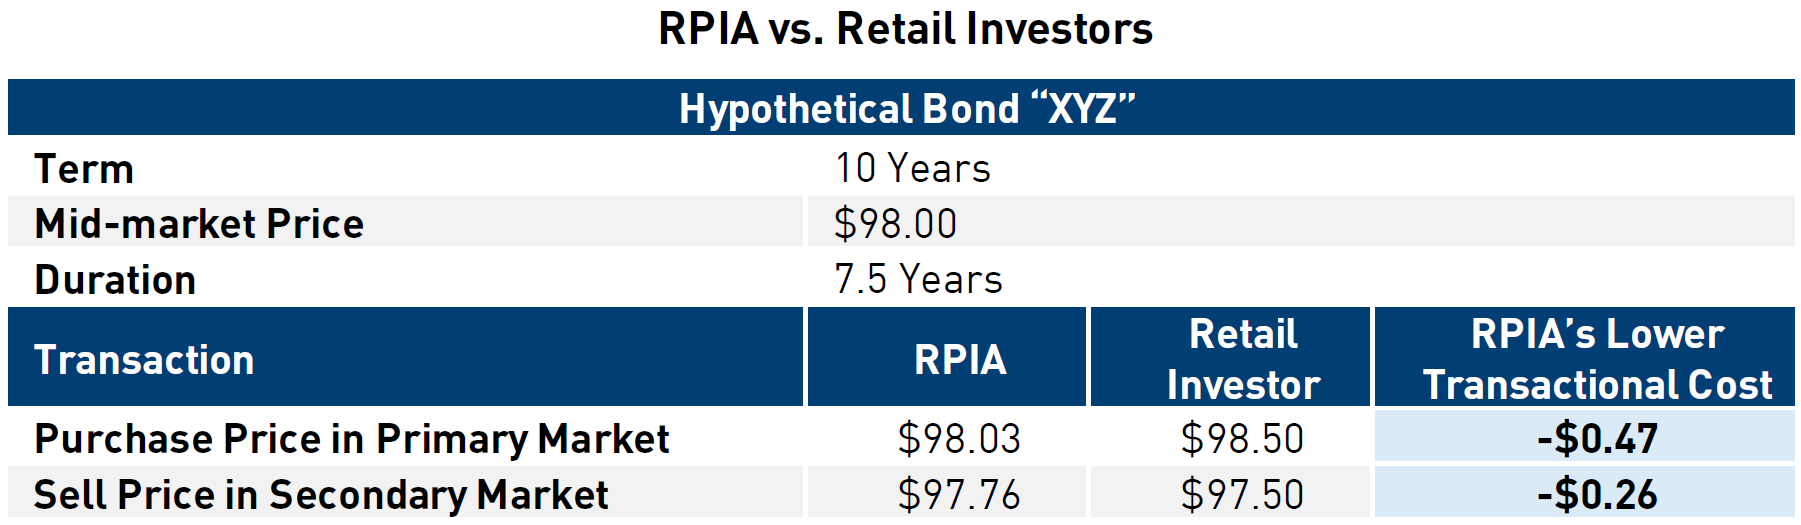 A Table Comparing RPIA vs. Retail Investors Cost of Execution